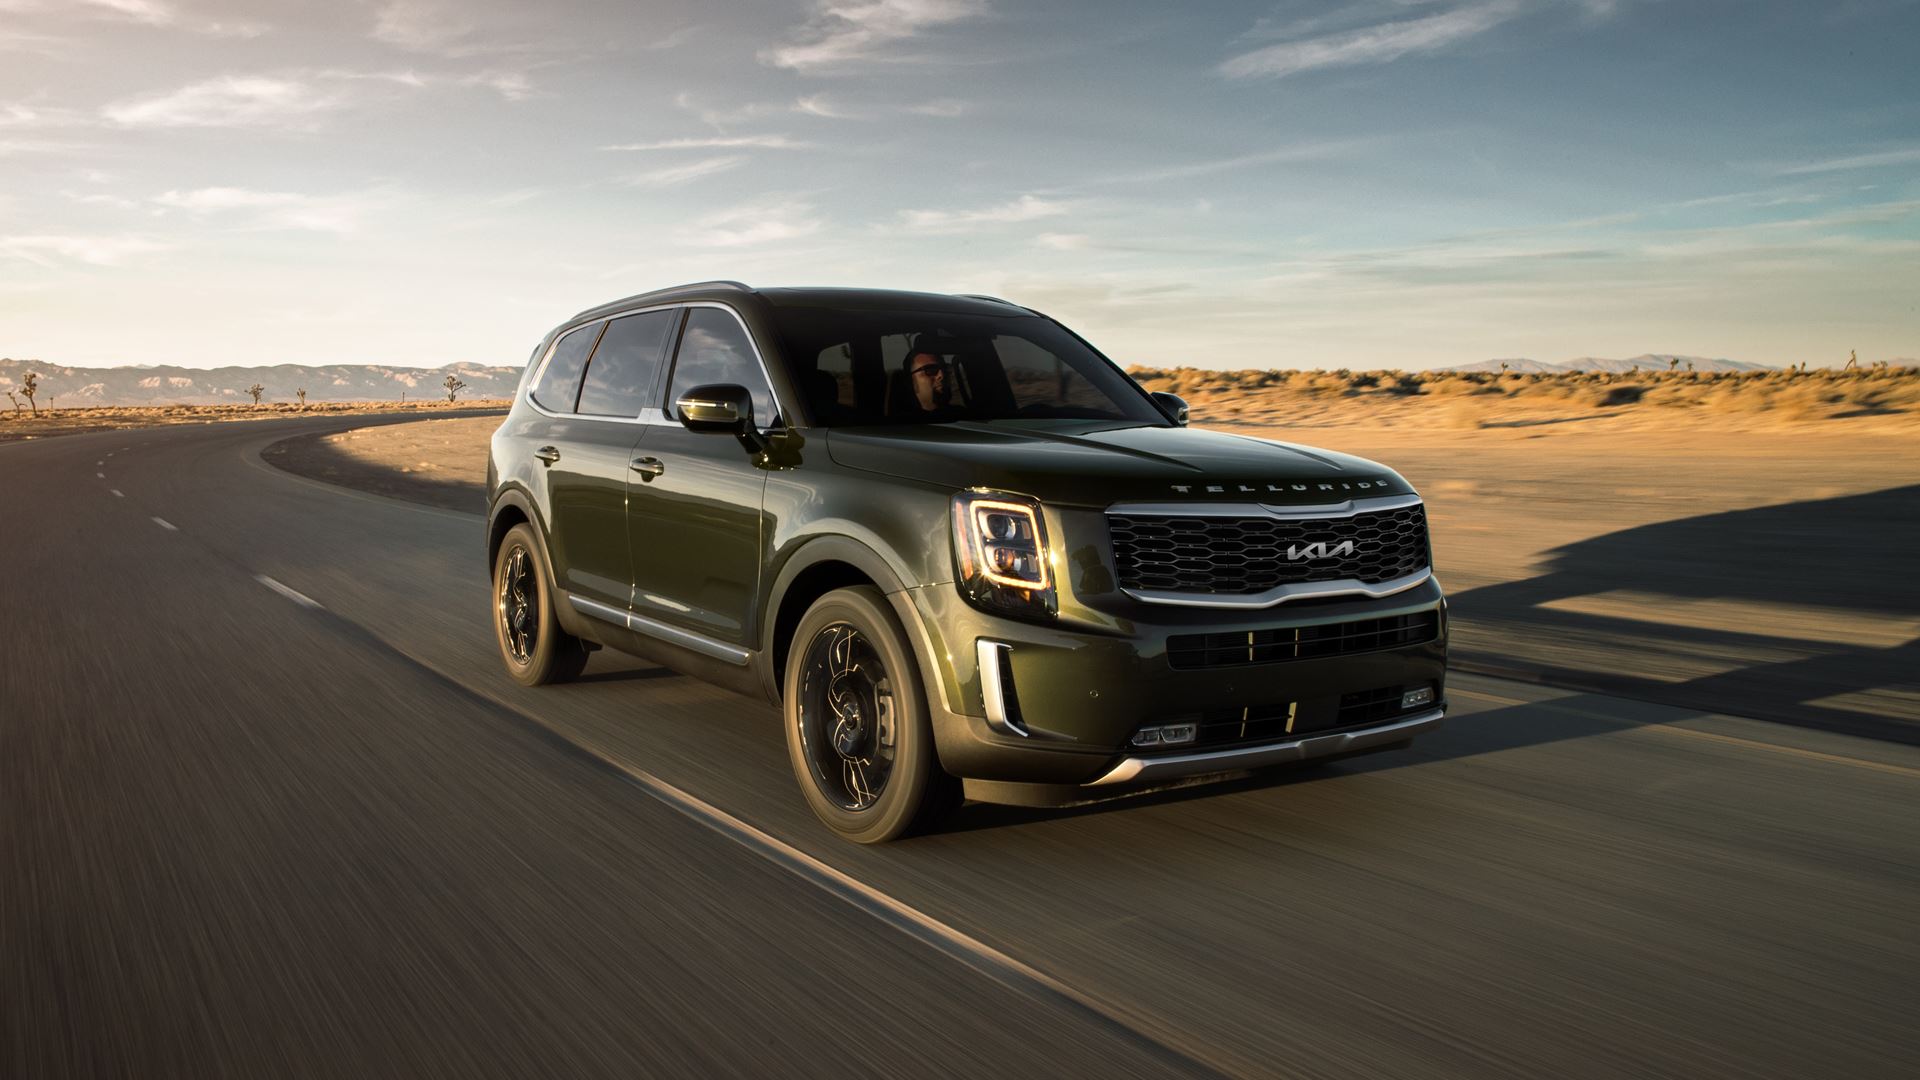 Kia named to Car and Driver 2022 Editors’ Choice Awards with six winning vehicles